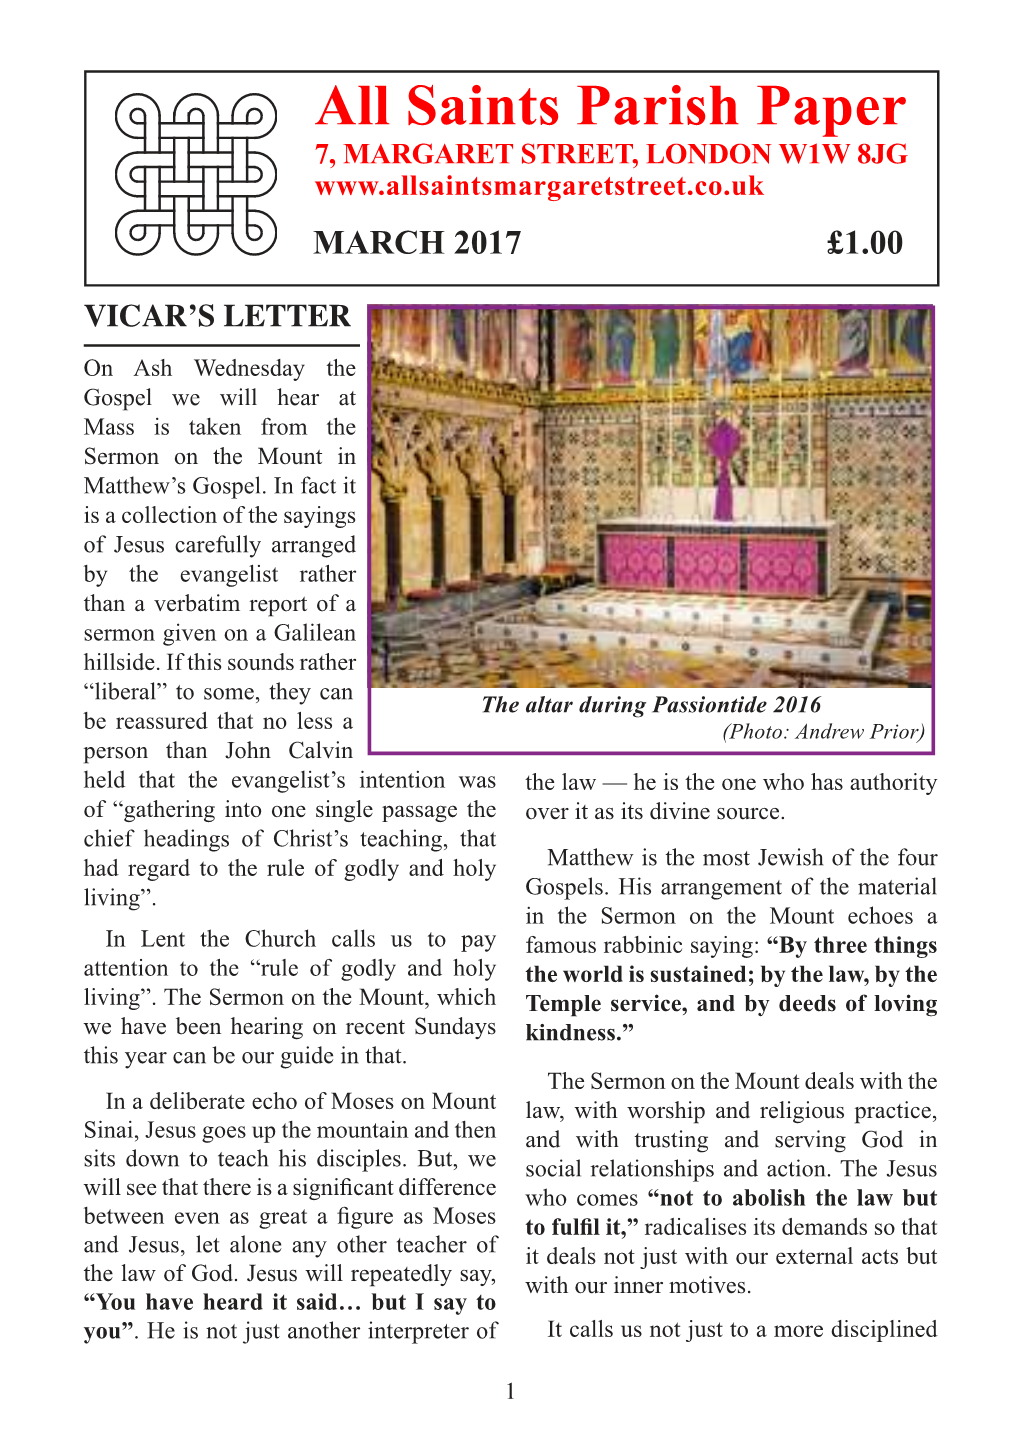 Parish Paper for March 2017